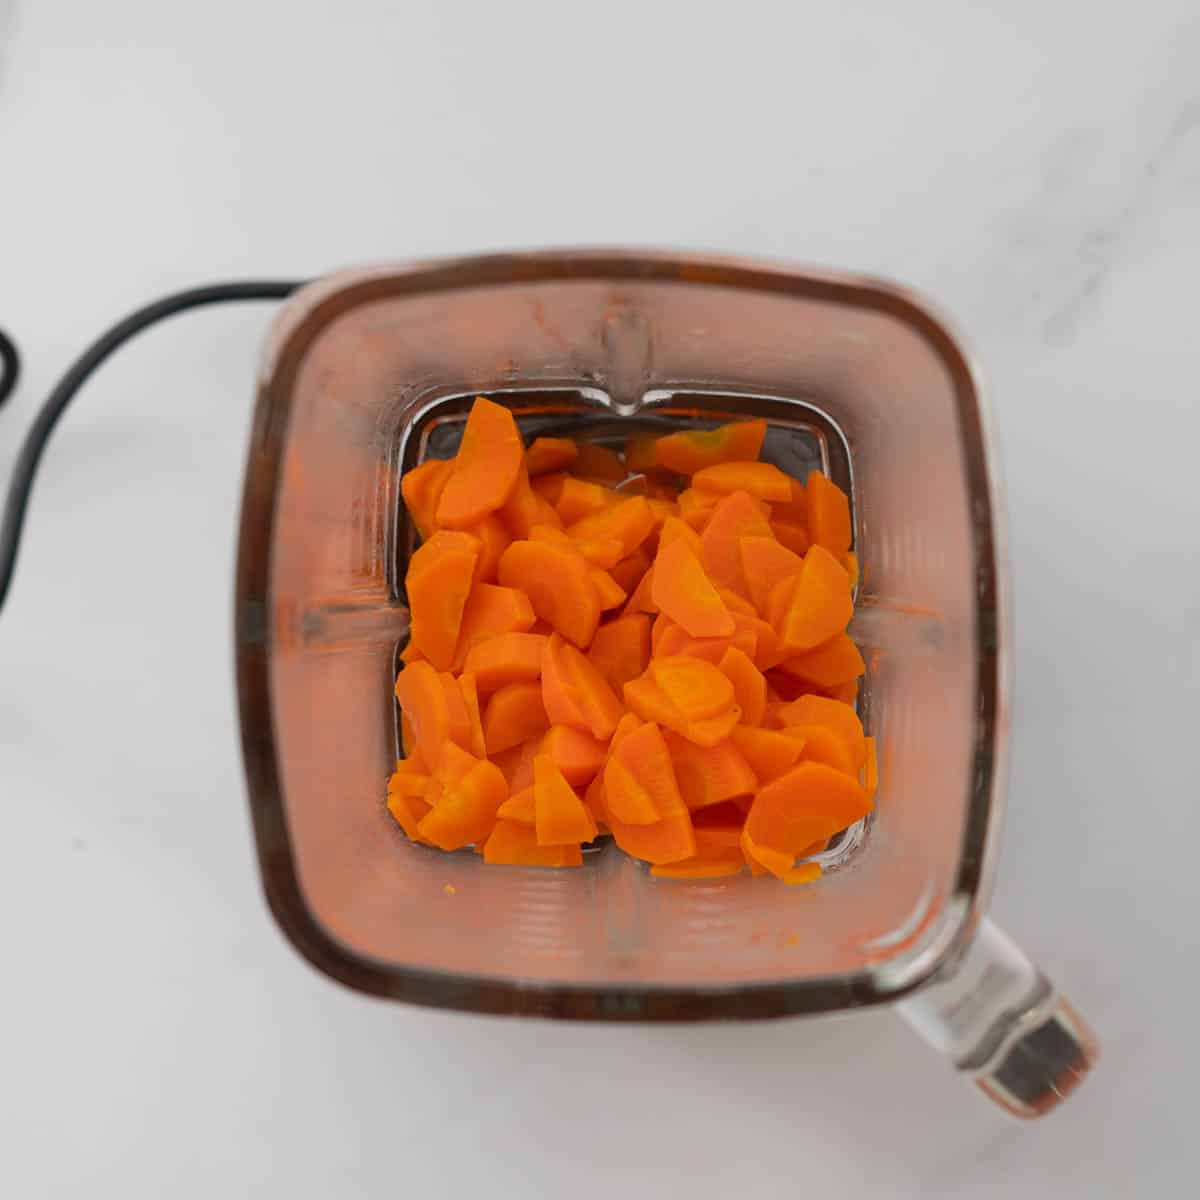 Tender cooked carrot slices in a glass blender jug.